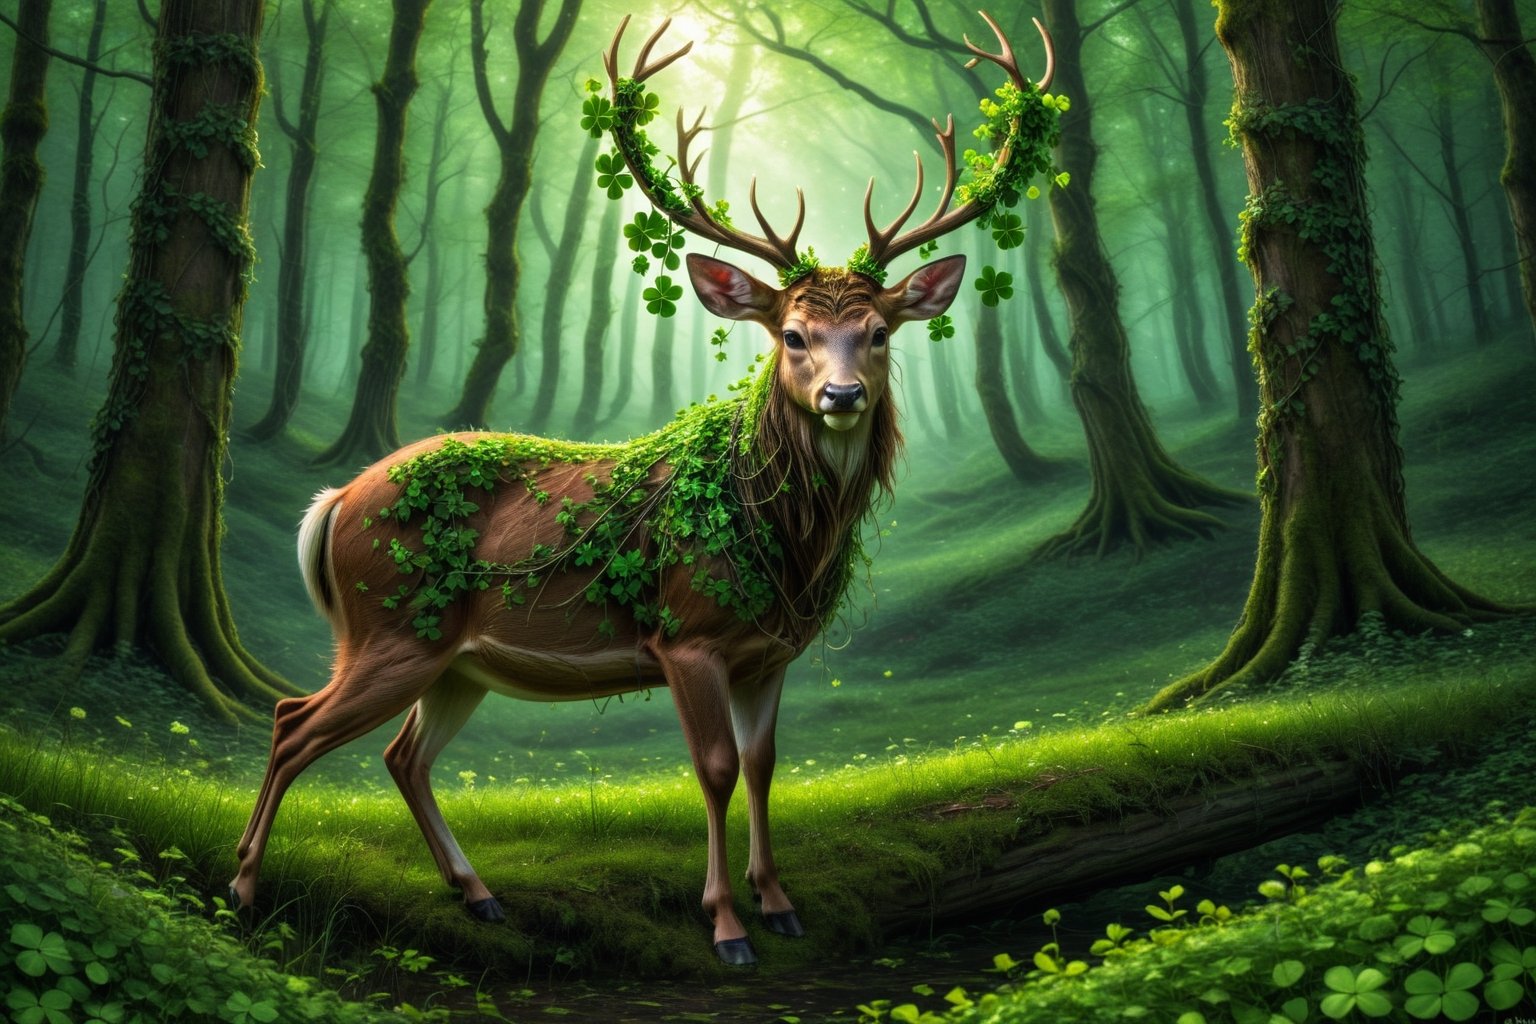 A deer with antlers full of tangled four-leaf clovers in a green forest full of four-leaf clovers, magical forest, magical lighting, high quality, dreamlike atmosphere, four-leaf clover necklace, Saint Patrick's Day, festive atmosphere of saint patrick , magic lights, fireflies, Celtic stone monoliths

,aesthetic,druidic,more detail XL